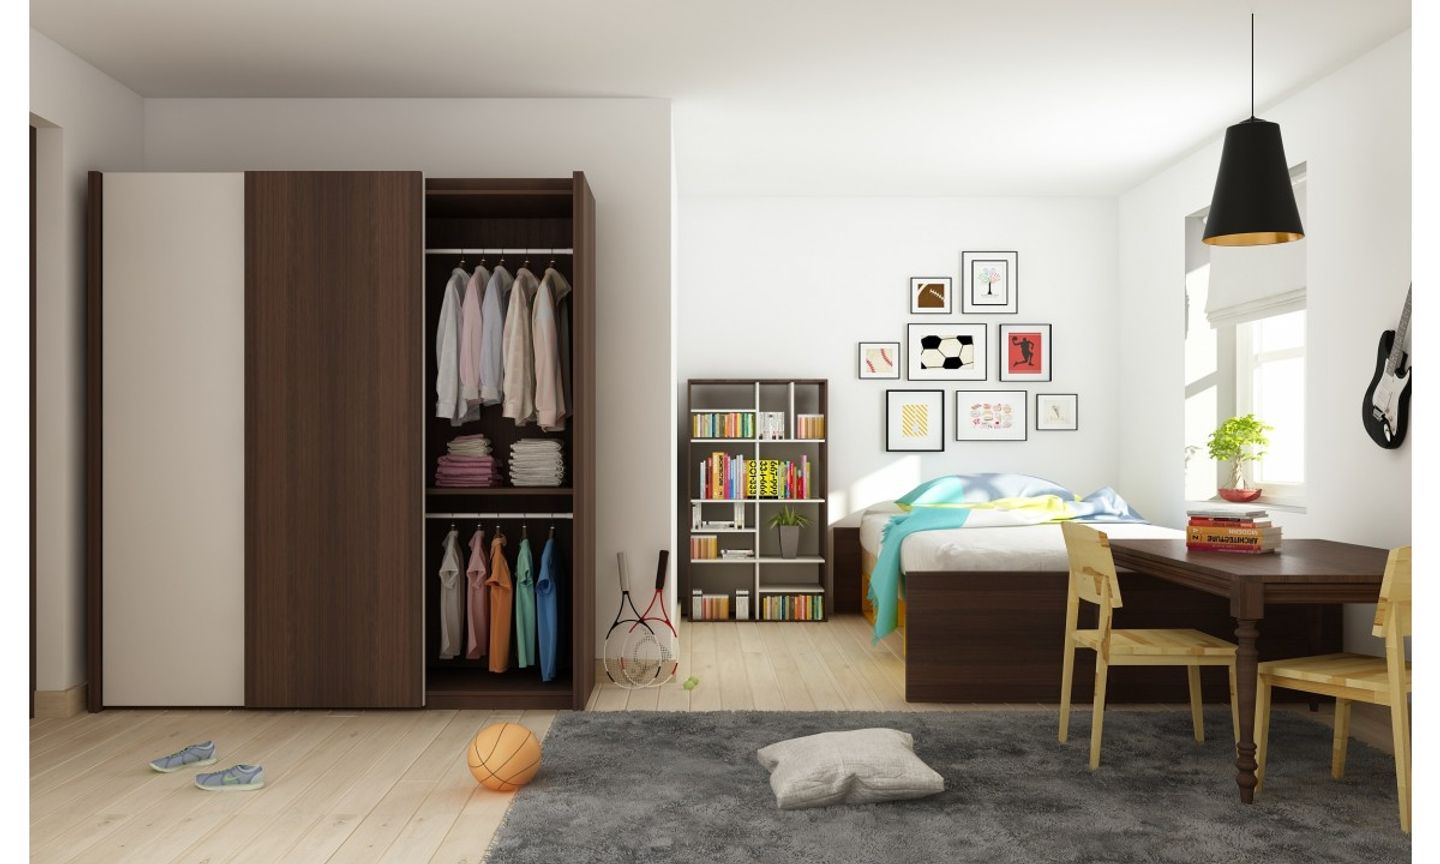 Modern Kid's Room Design In White And Brown With Wallpaper